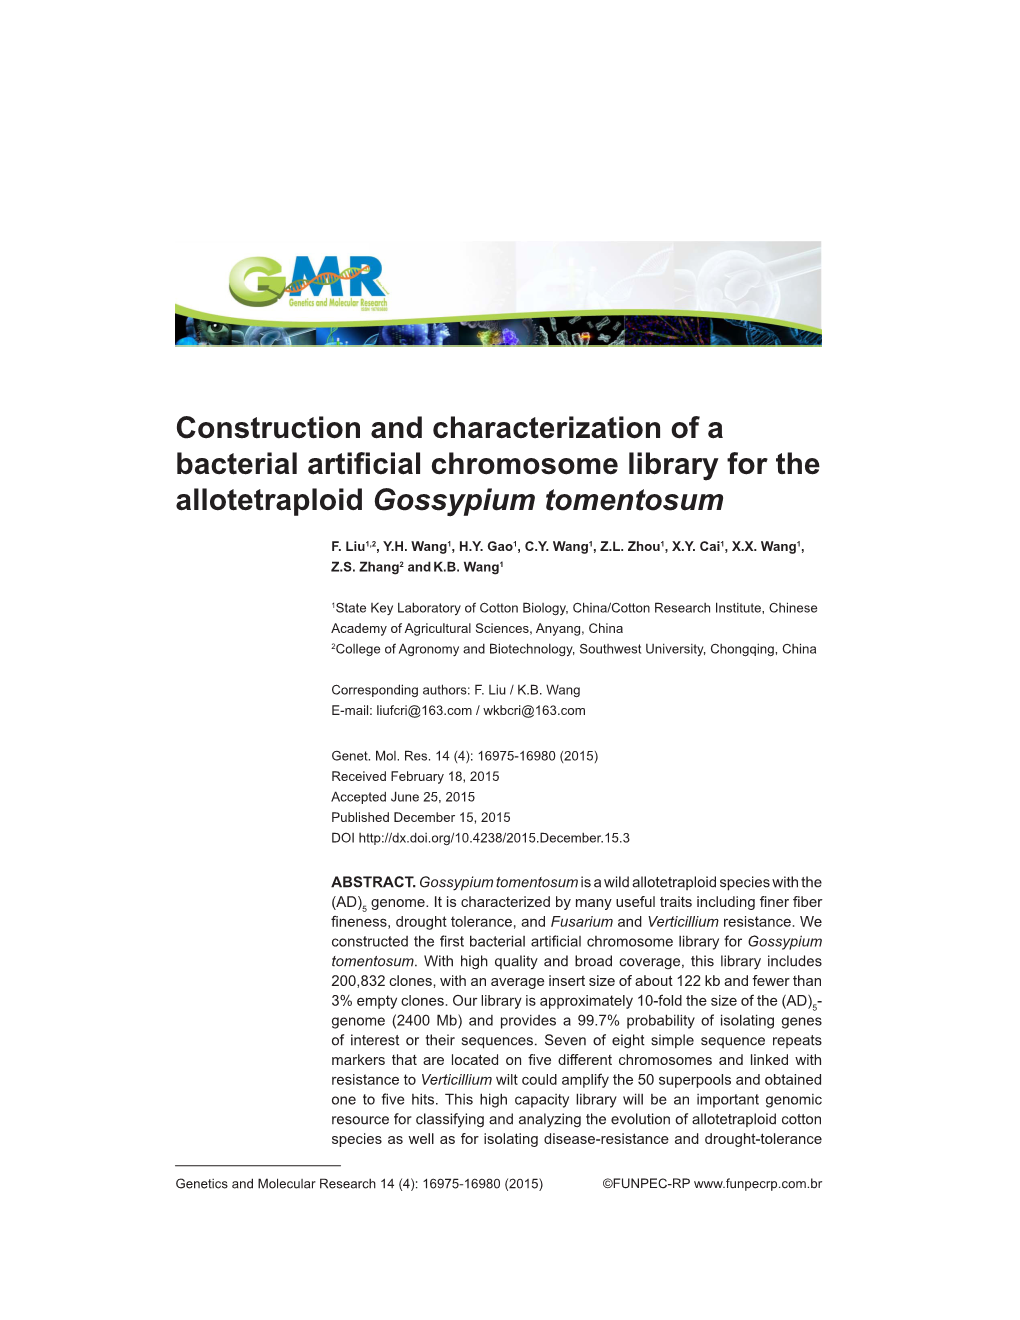 Construction and Characterization of a Bacterial Artificial Chromosome Library for the Allotetraploid Gossypium Tomentosum